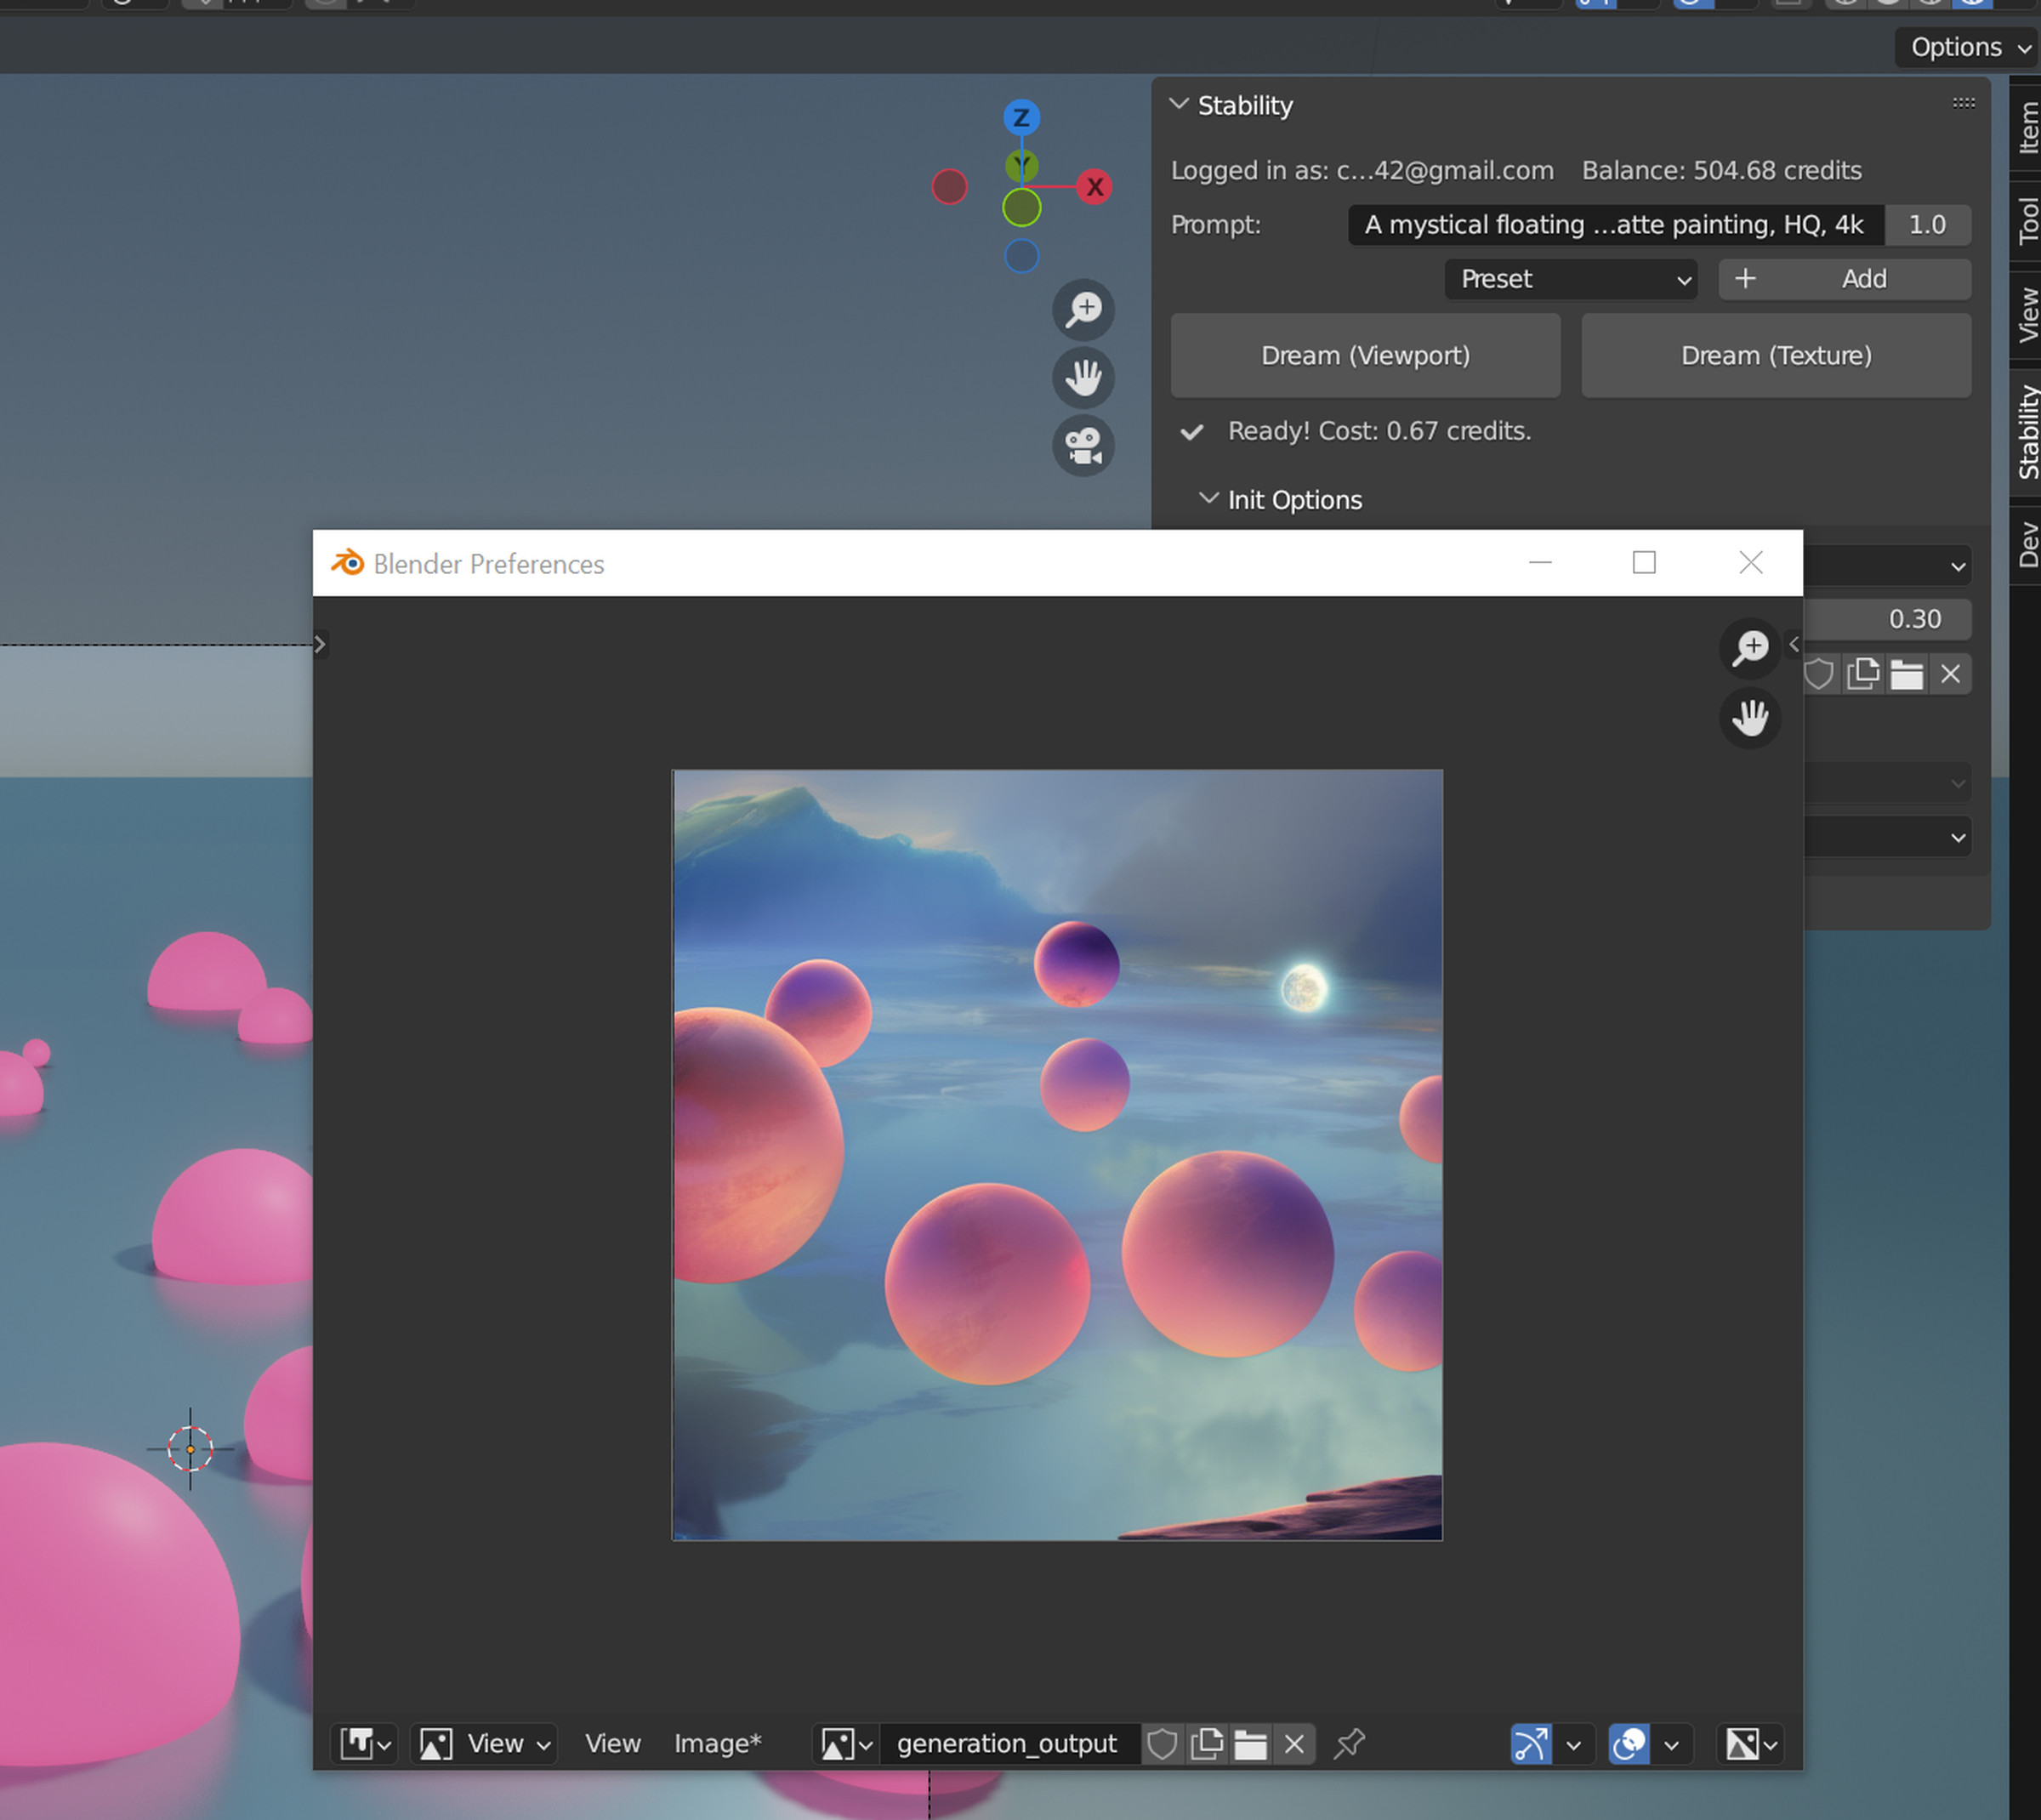 A screenshot of the Stability for Blender plugin generating an image of pink orbs based on an existing model render.